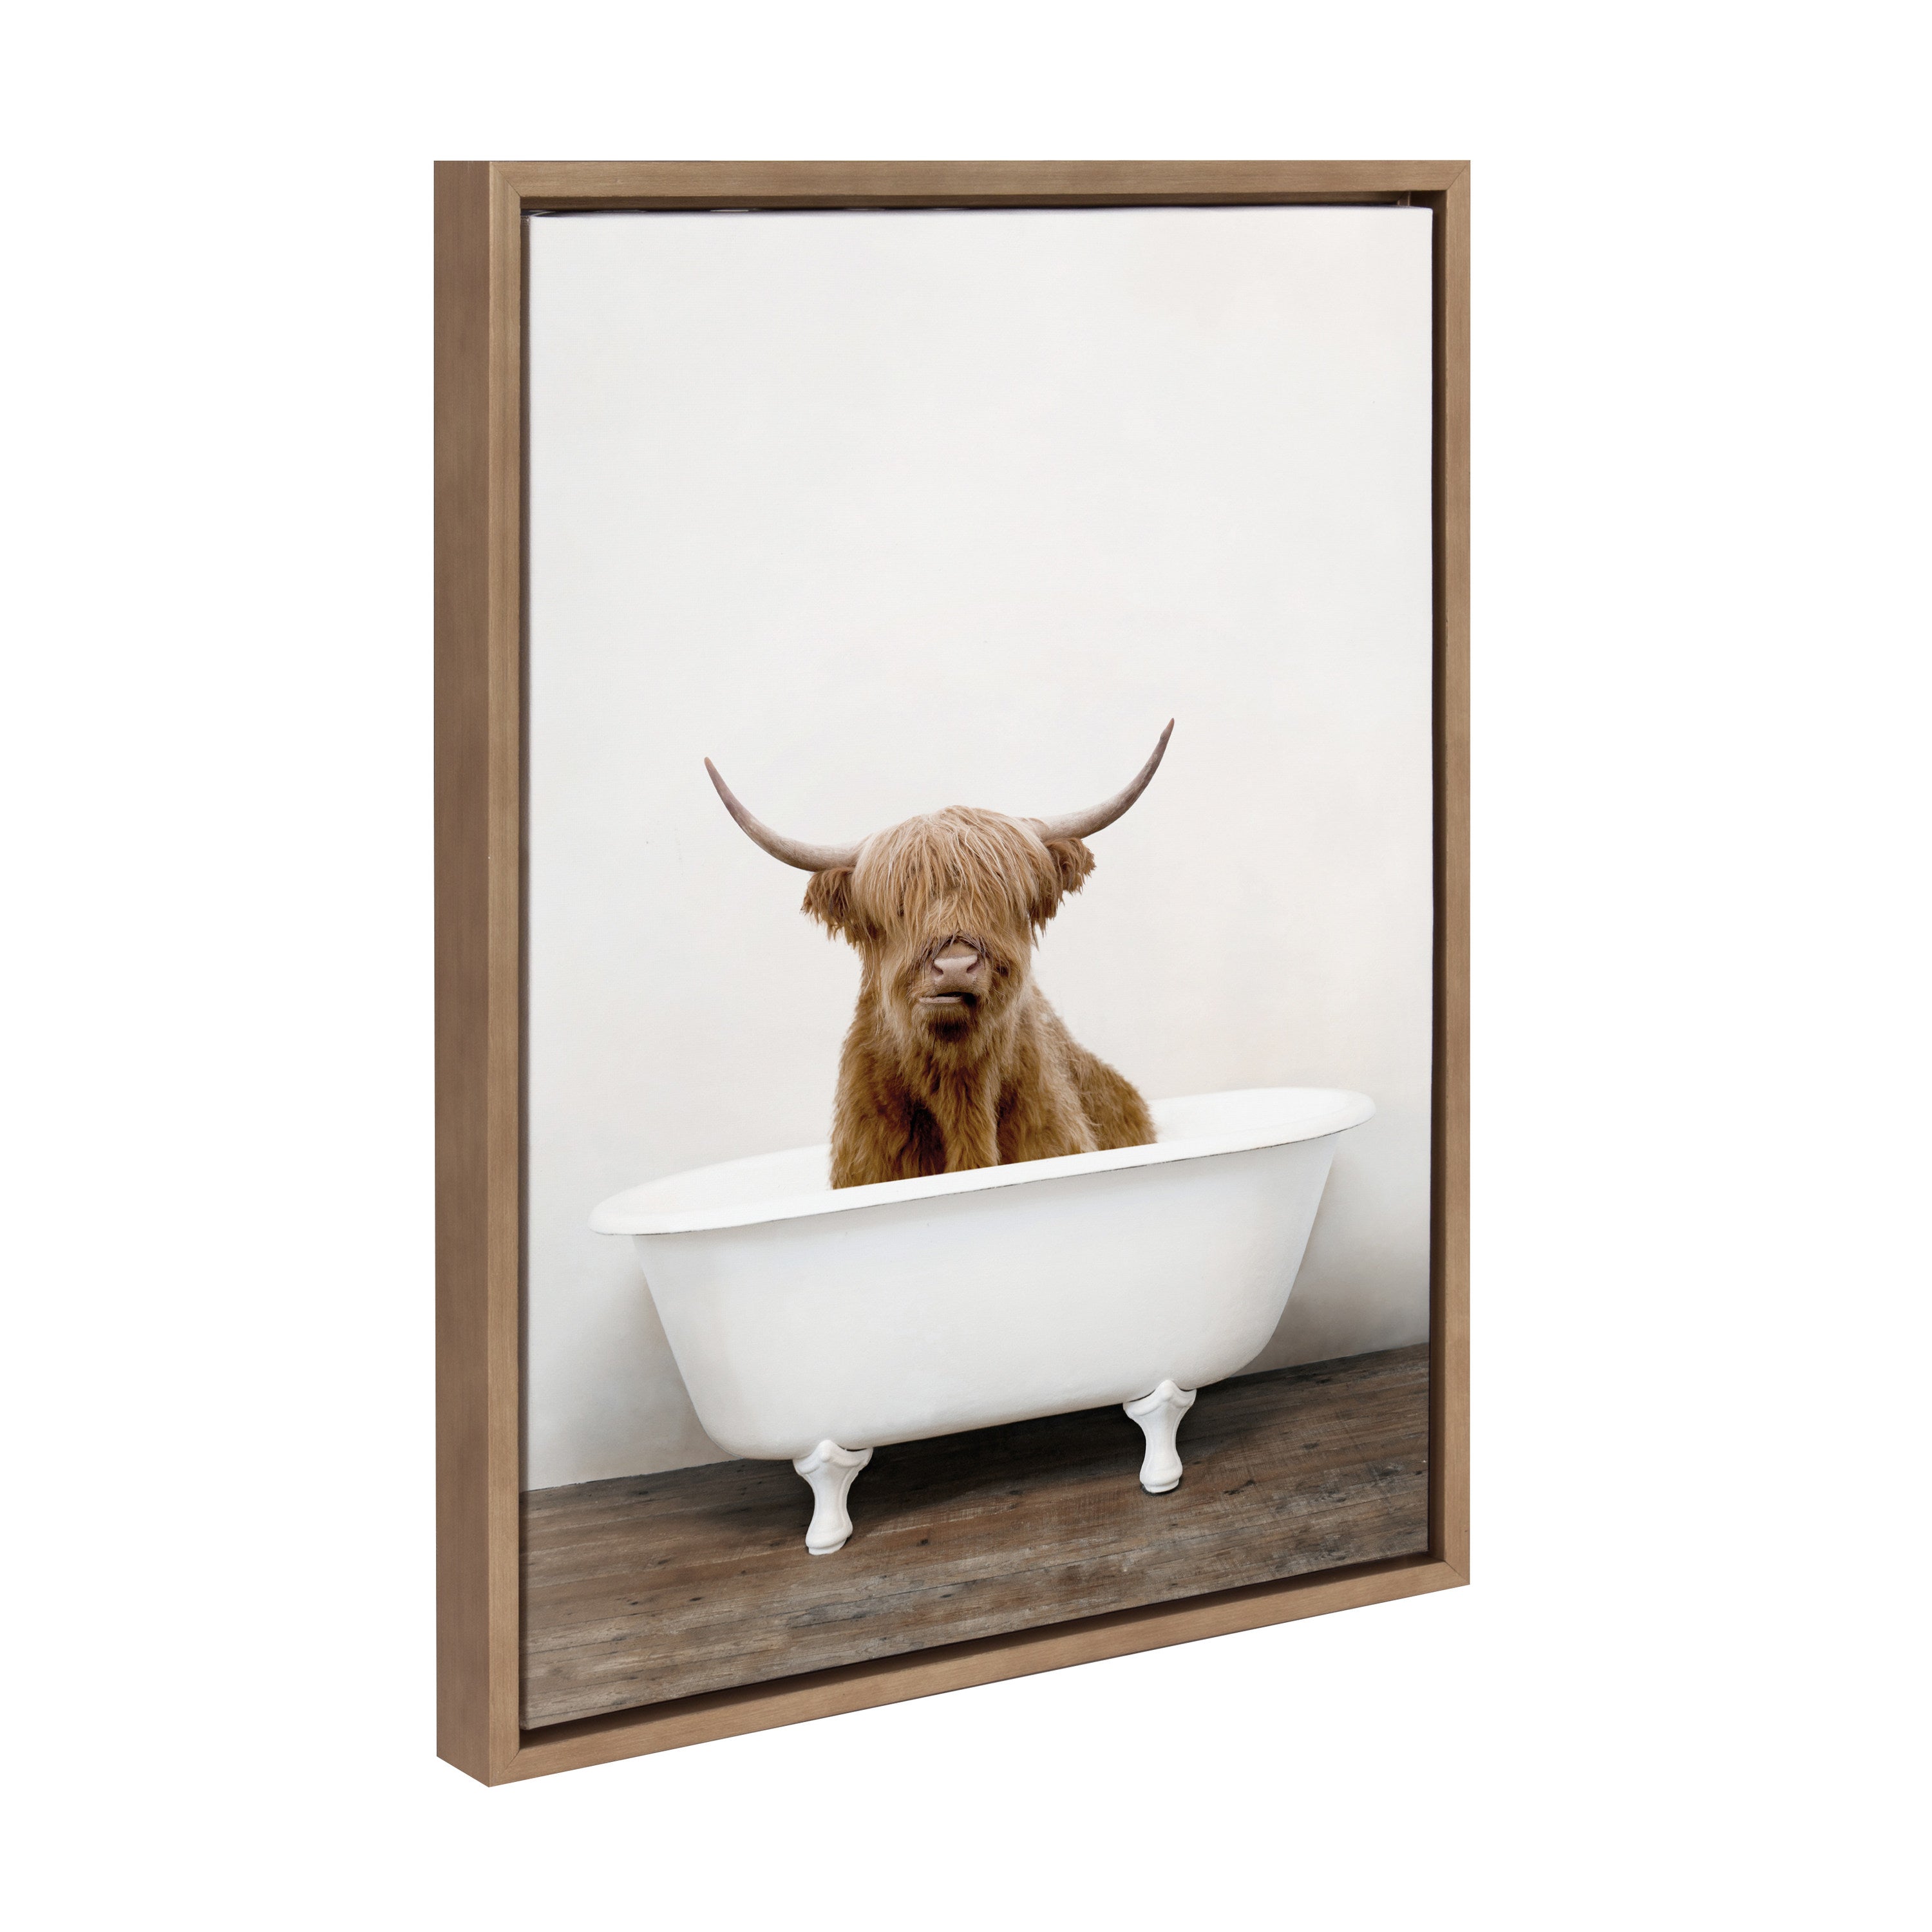 Sylvie Highland Cow in Tub Color Framed Canvas by Amy Peterson Art Studio